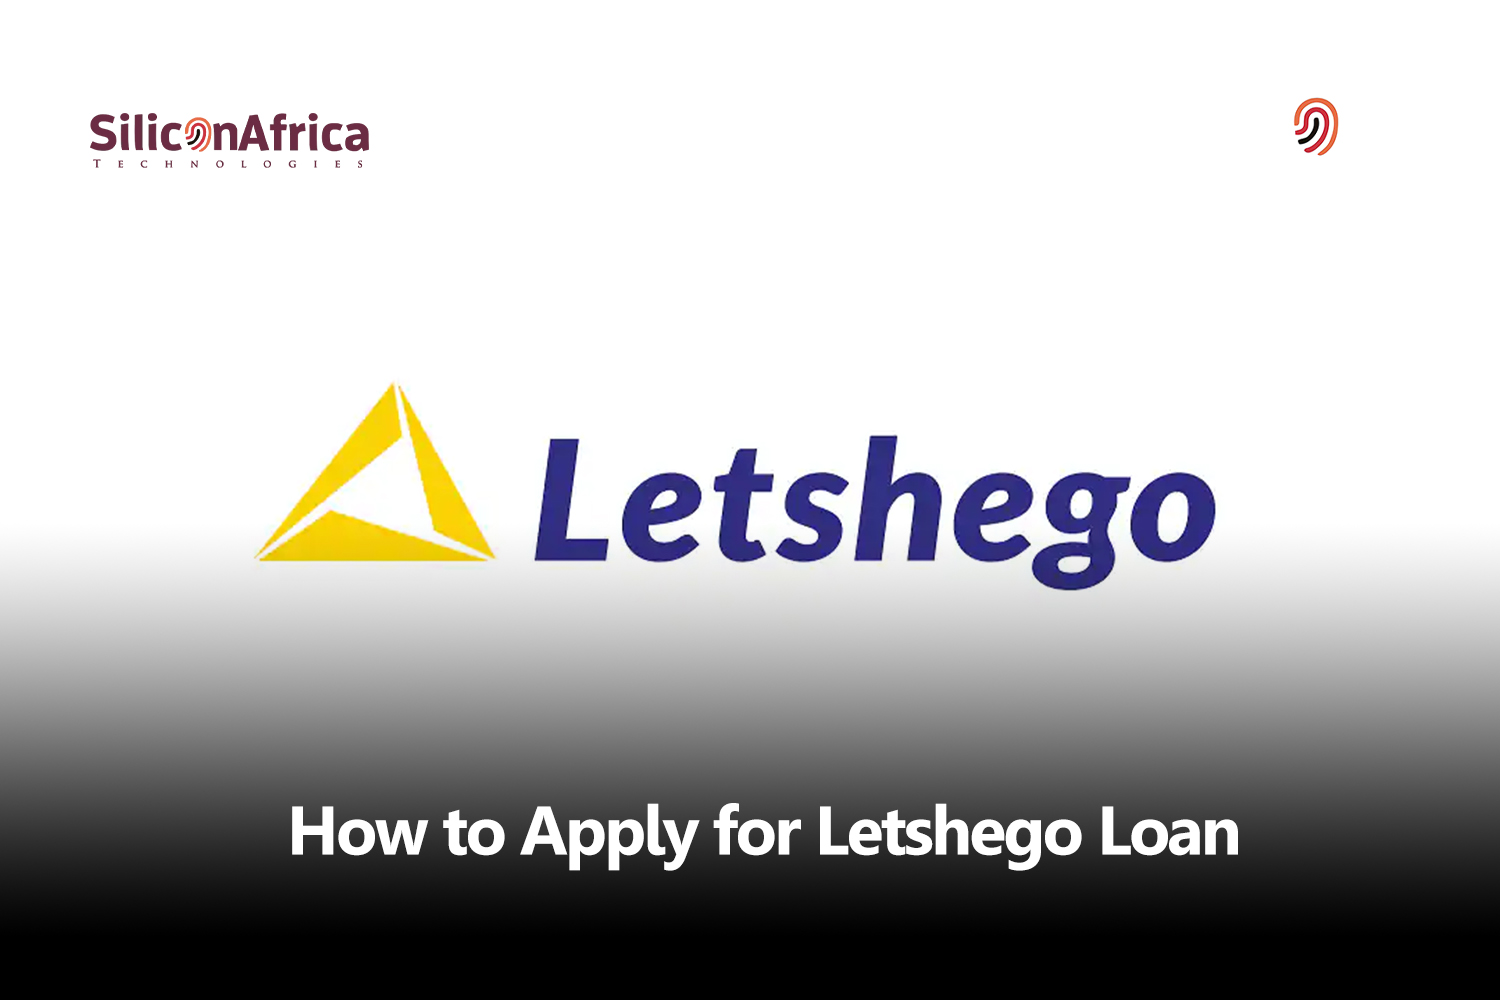 How to Apply for Letshego Loan